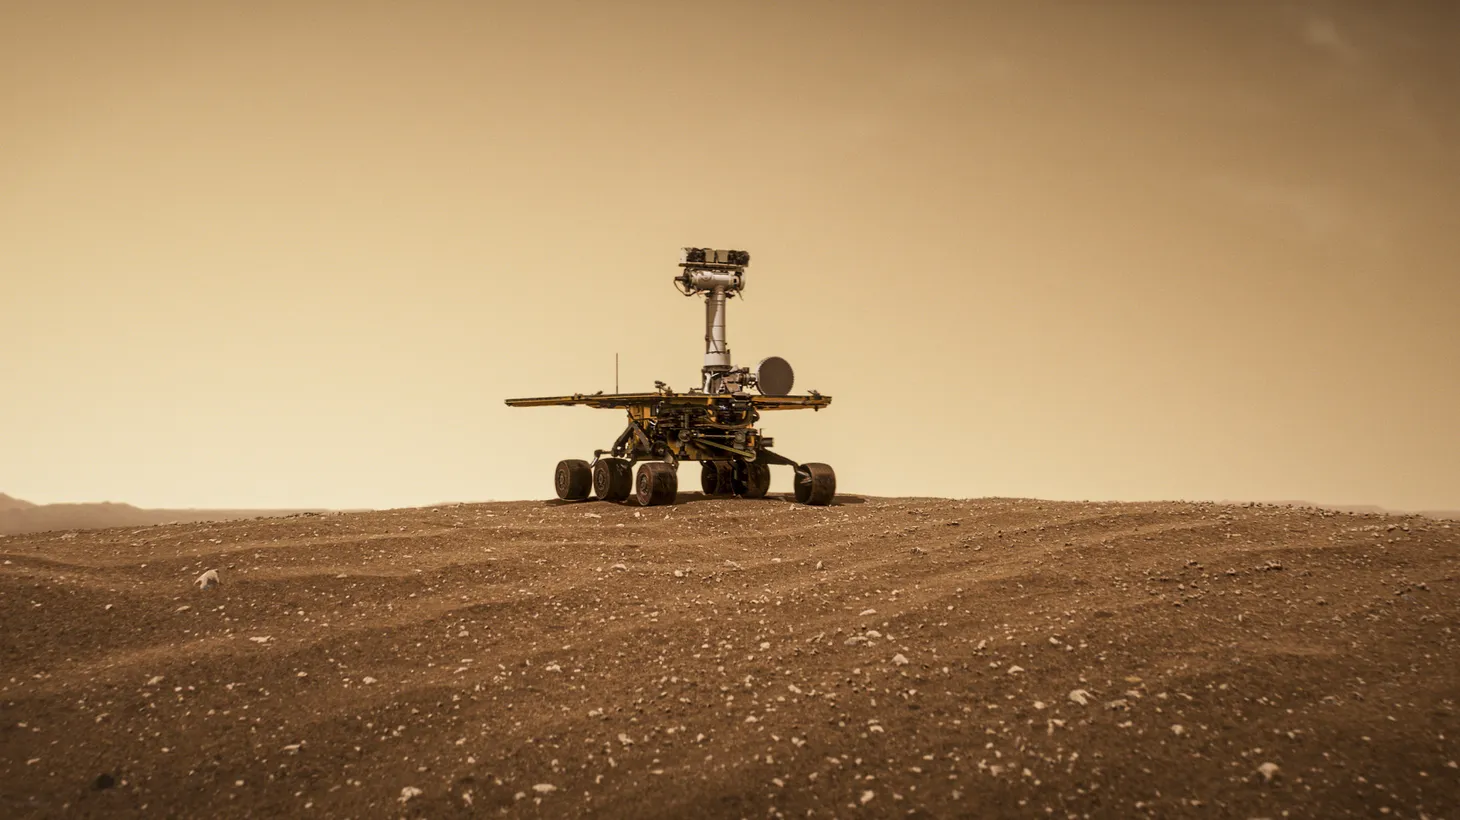 “Opportunity literally landed [on Mars], opened her eyes, and there was incredible science 20 feet right in front of her,” says NASA scientist Doug Ellison.